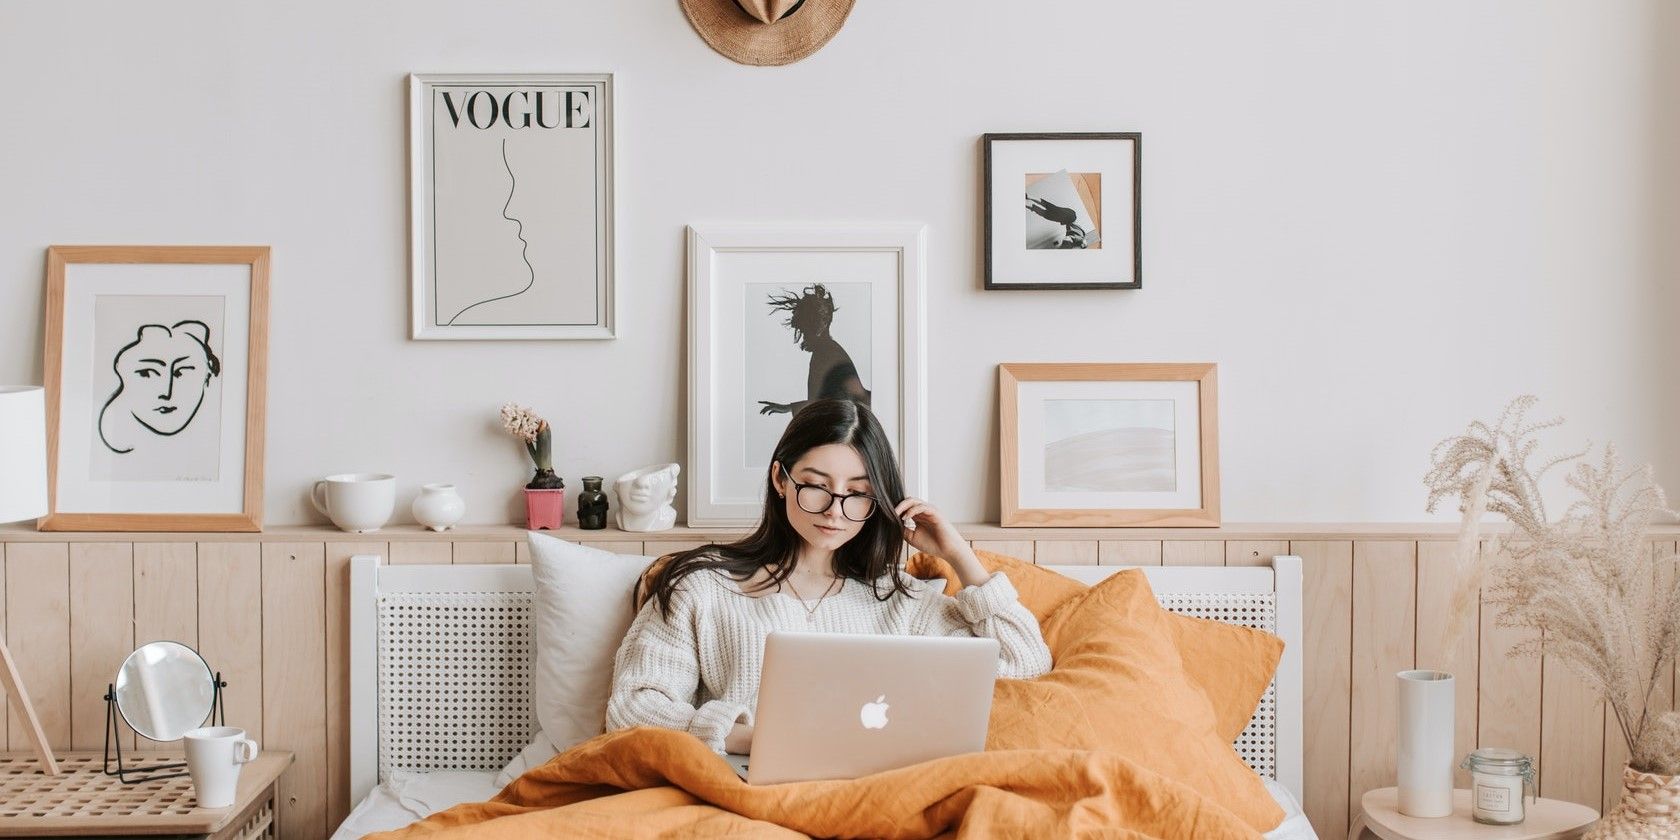 https://static1.makeuseofimages.com/wordpress/wp-content/uploads/2021/09/Woman-Relaxing-With-Laptop.jpg